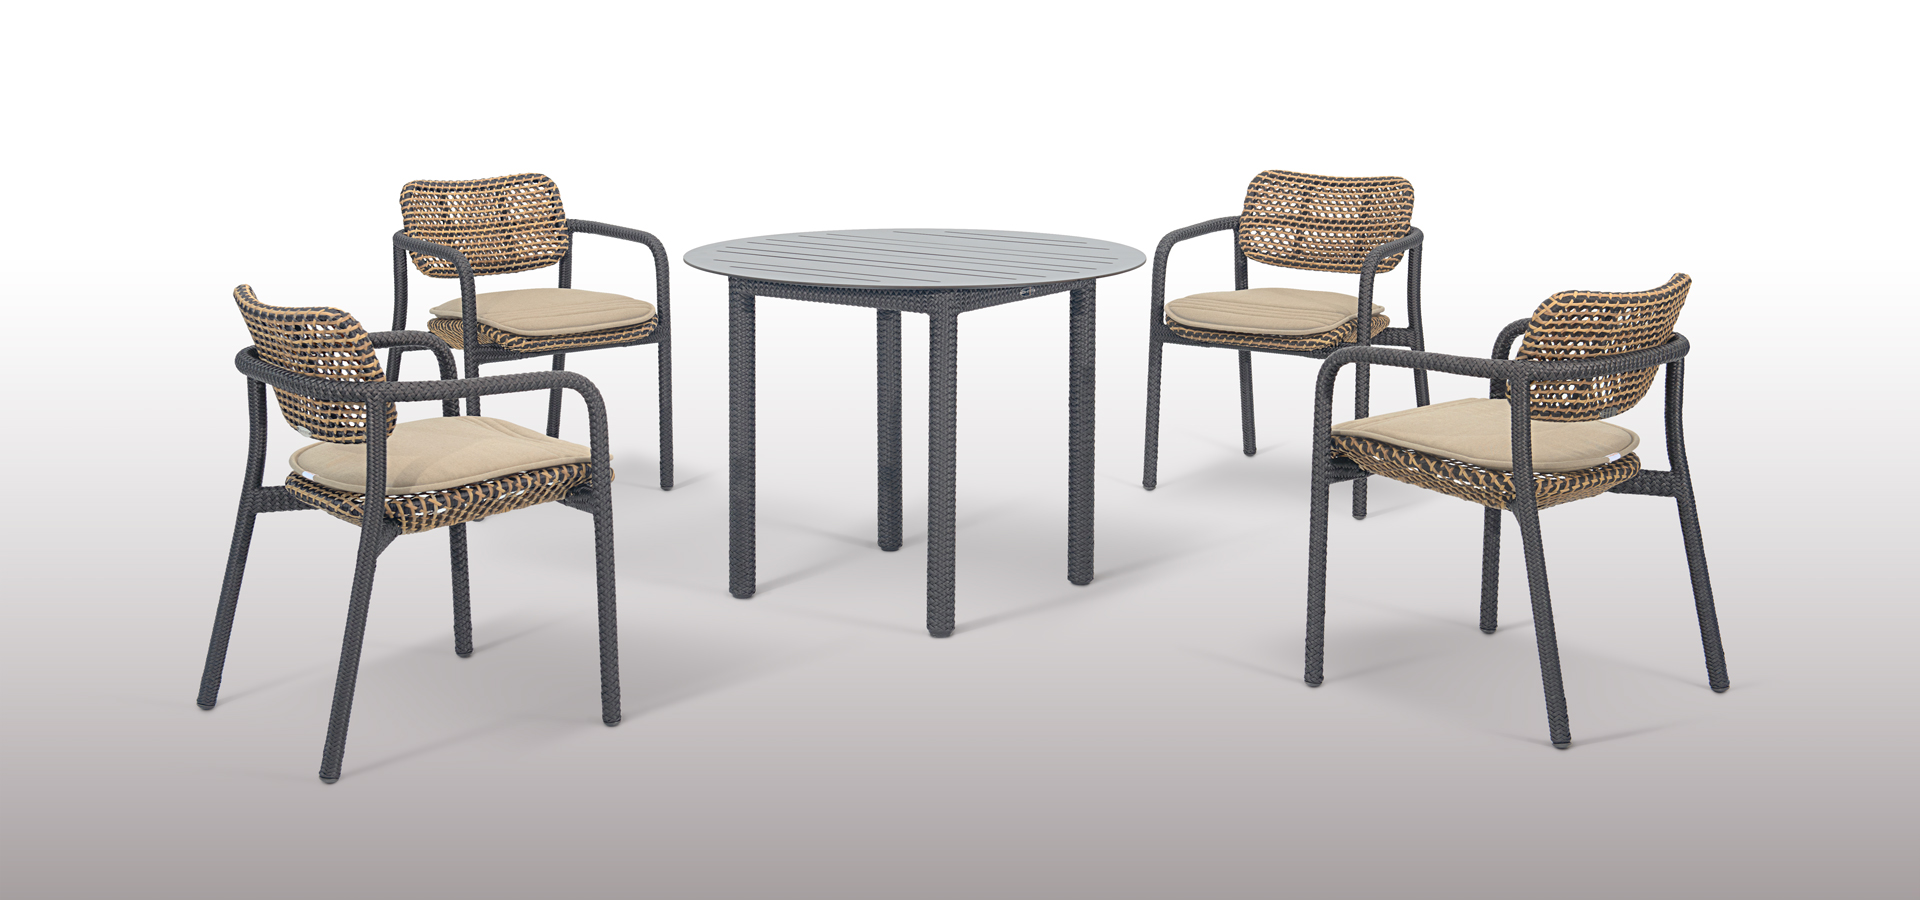 ohmm-outdoor-furniture-kara outdoor -4-arm-chairs-table